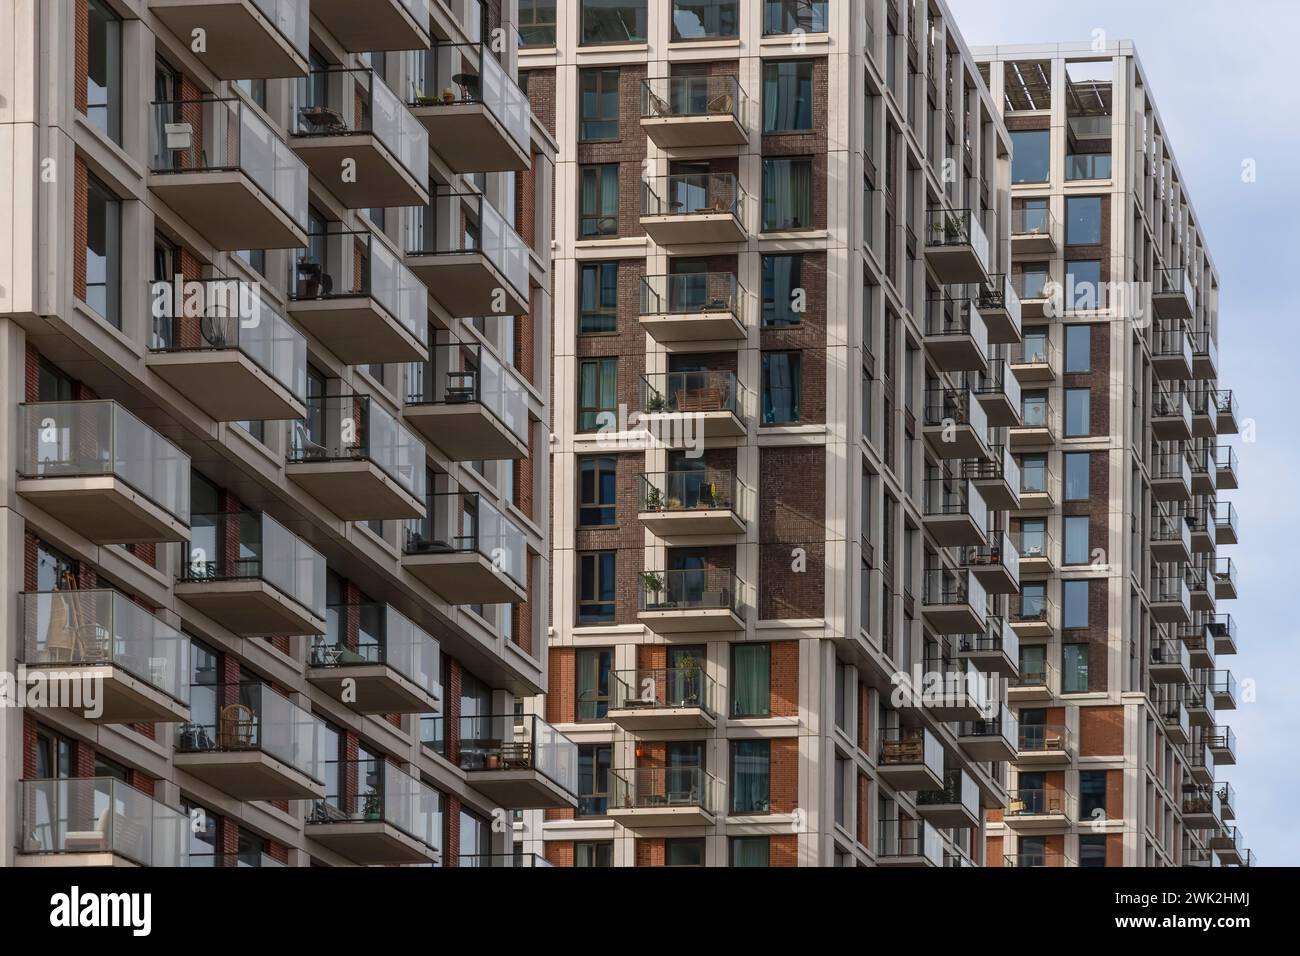 Modern high-rise apartments with balconies in Amsterdam. Stock Photo